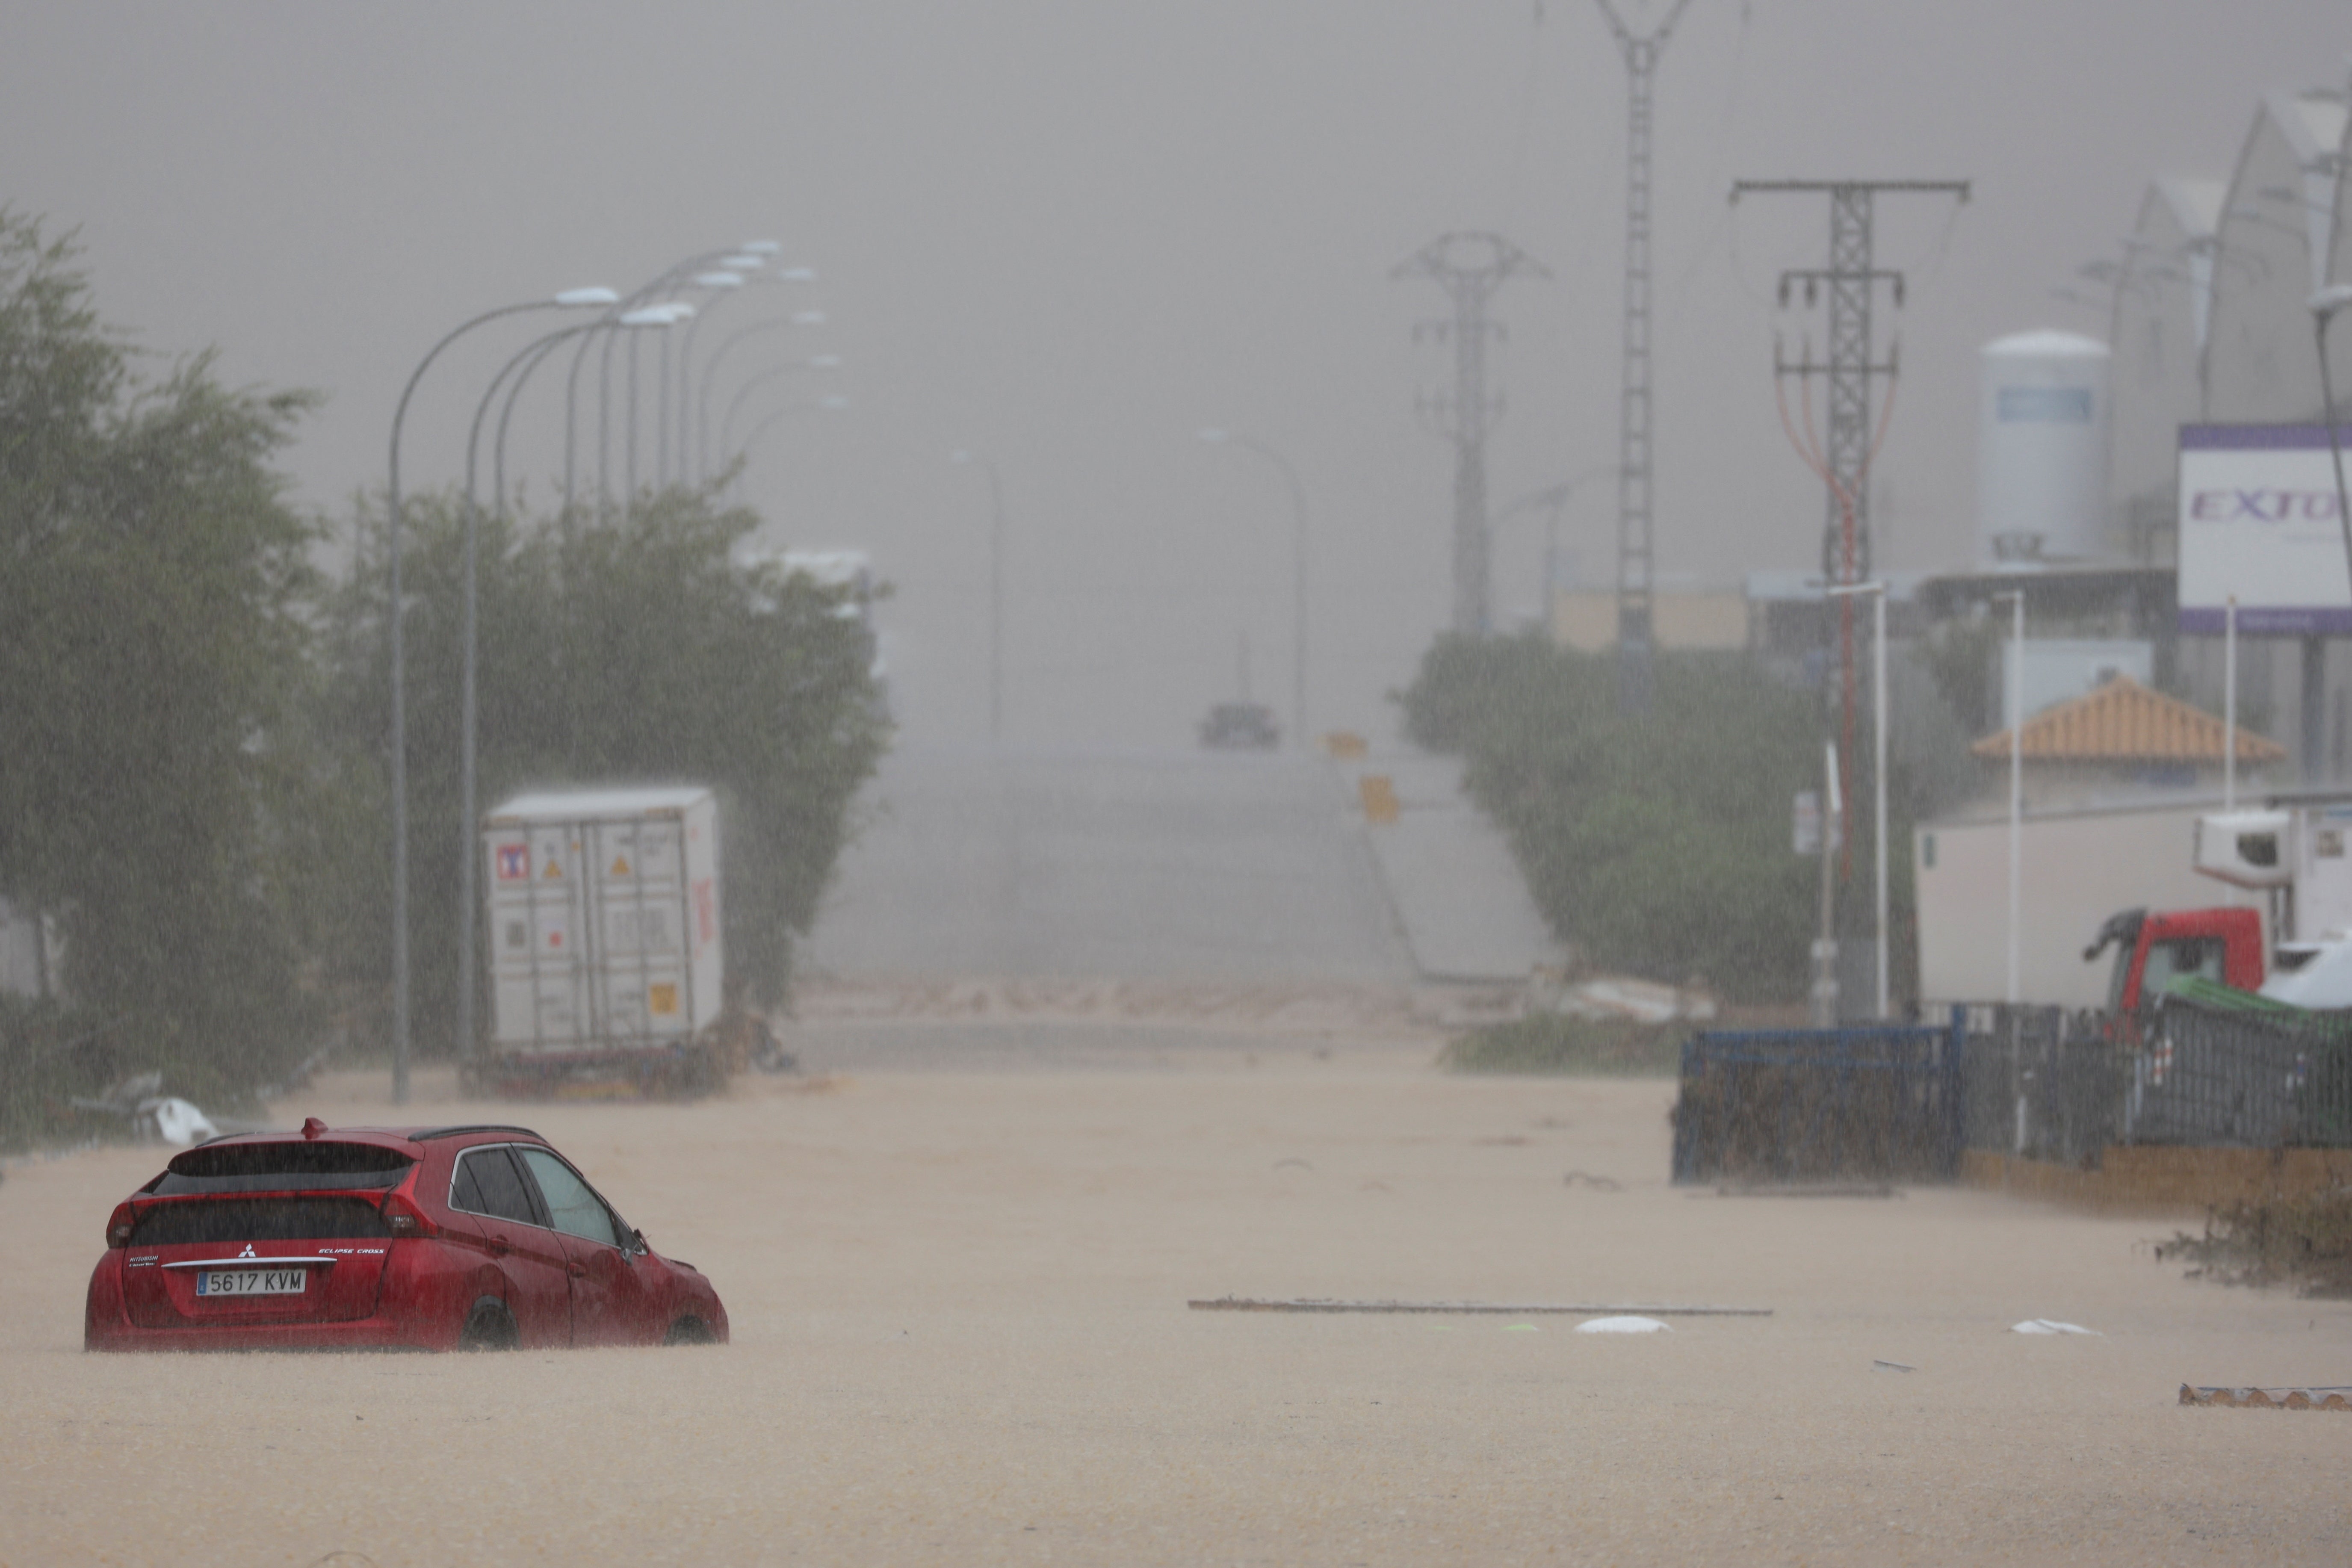 A car is stranded after heavy rain in Toledo, Spain